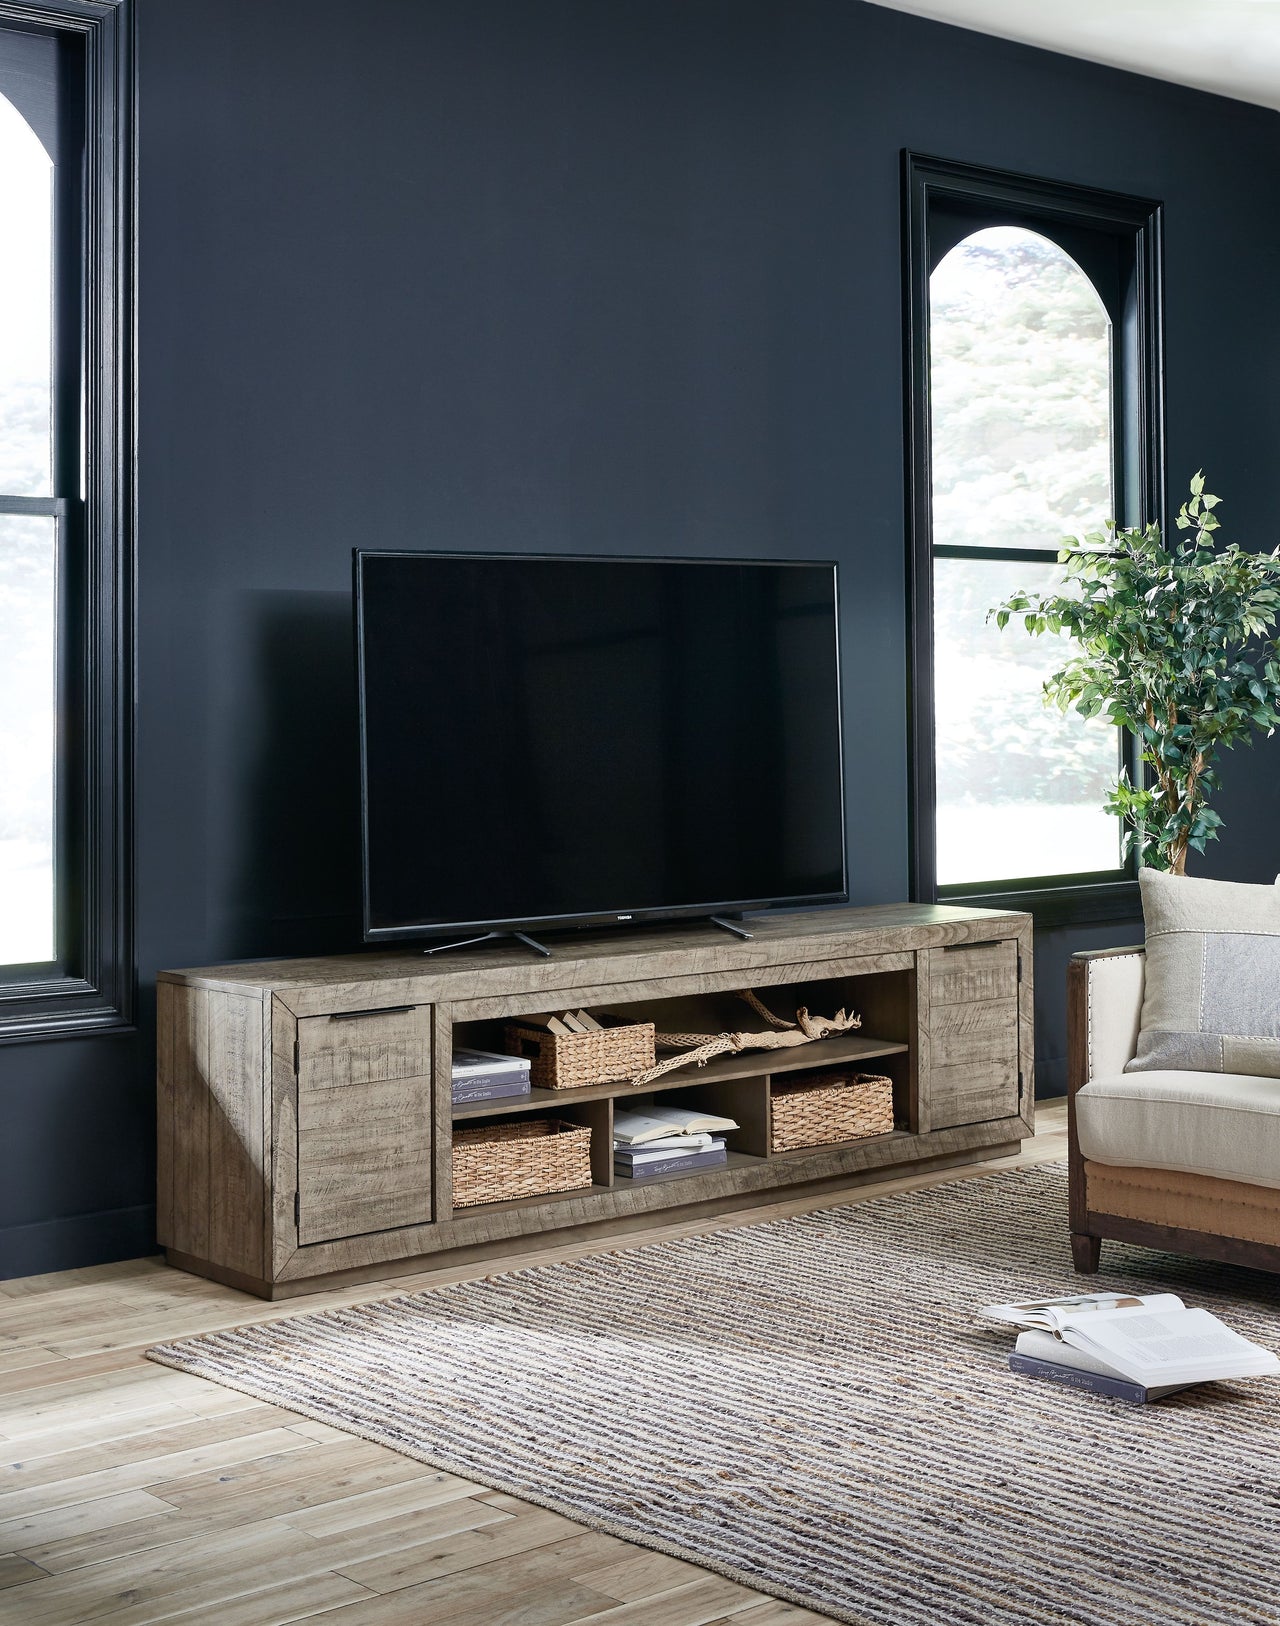 Krystanza - Weathered Gray - TV Stand With Wide Fireplace Insert - Tony's Home Furnishings